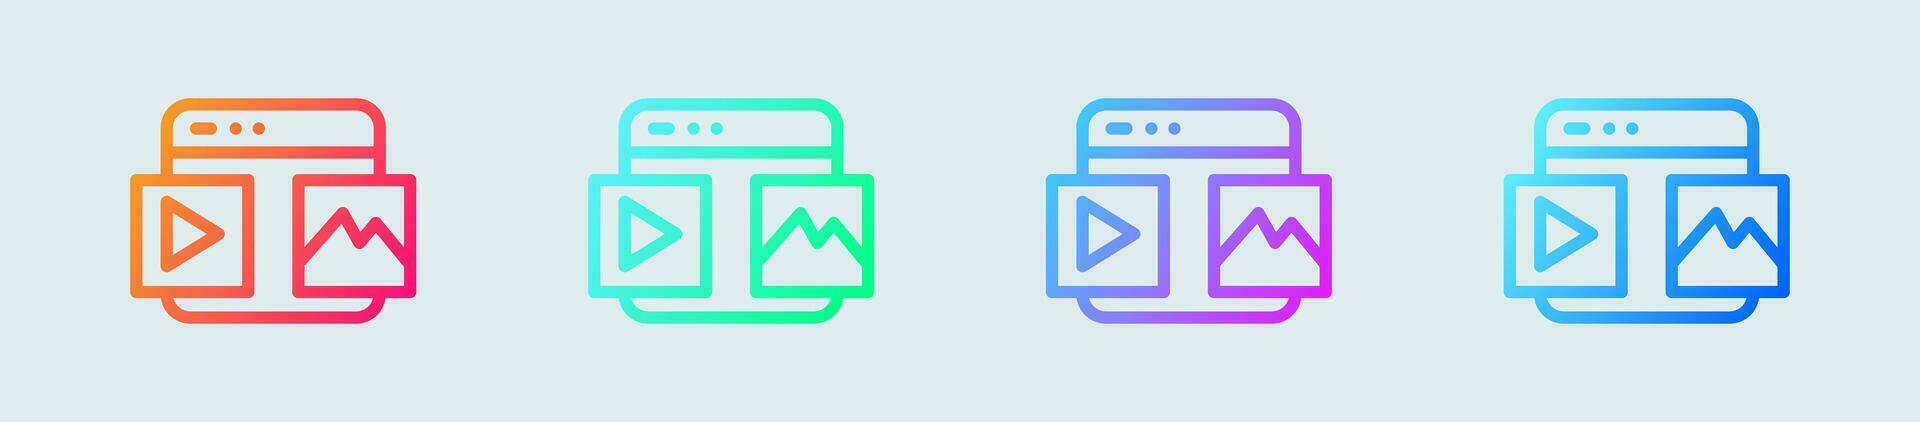 Content line icon in gradient colors. Social media signs vector illustration.